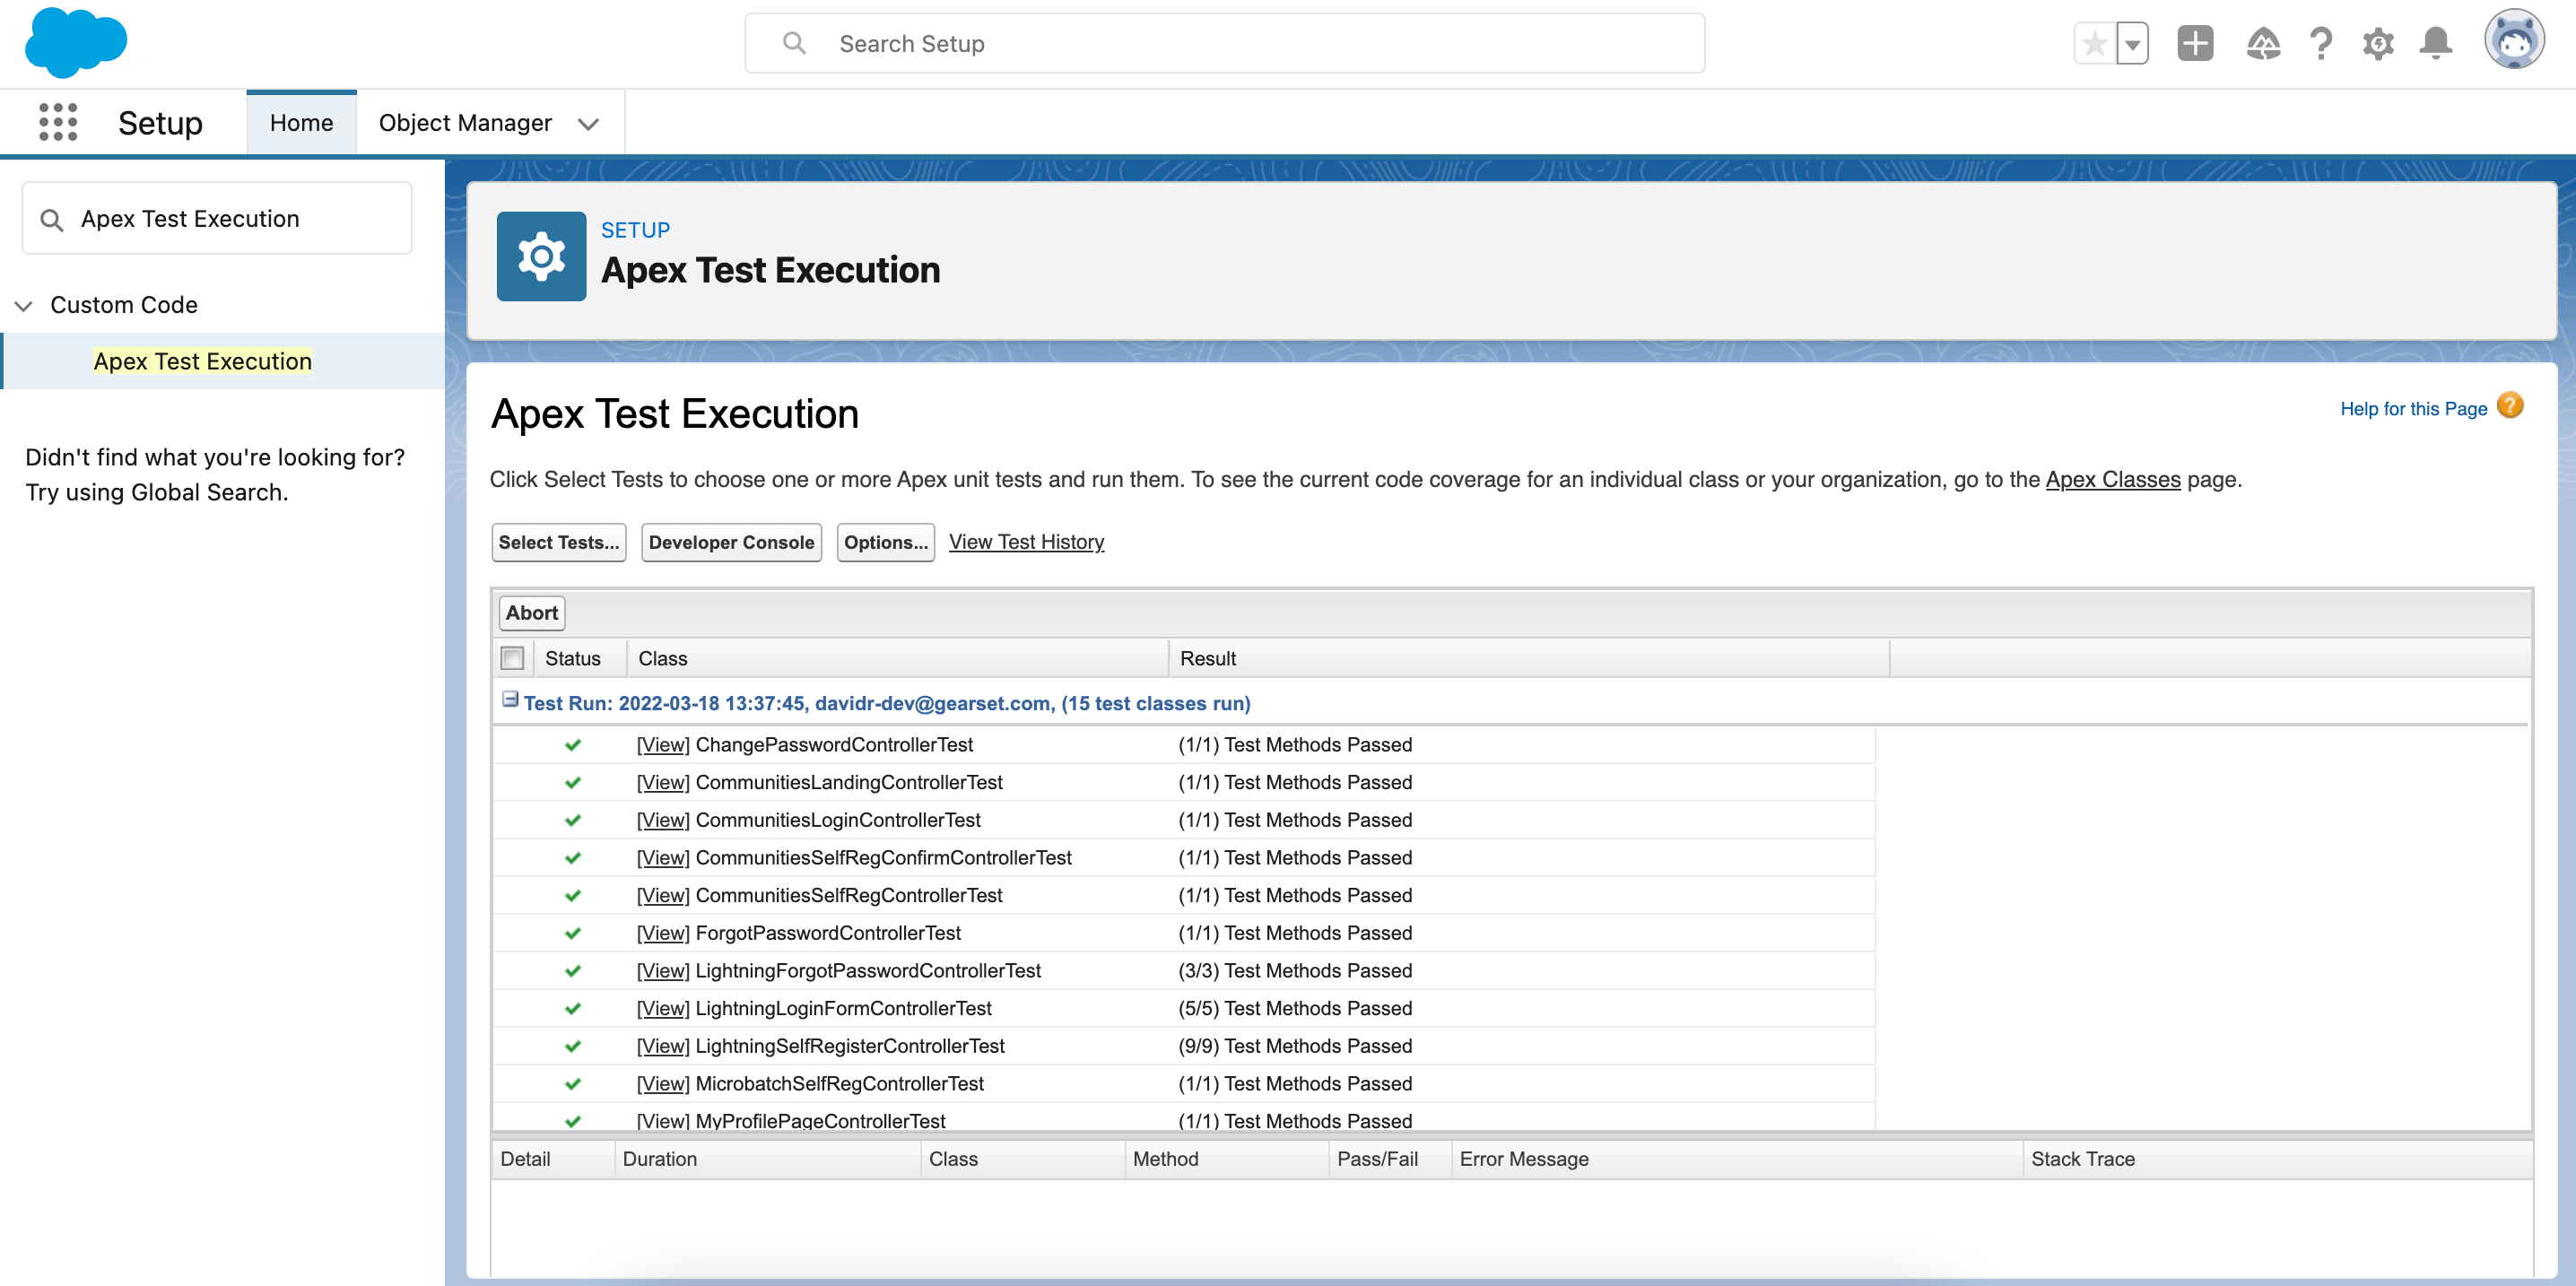 Salesforce's Apex Test Execution page